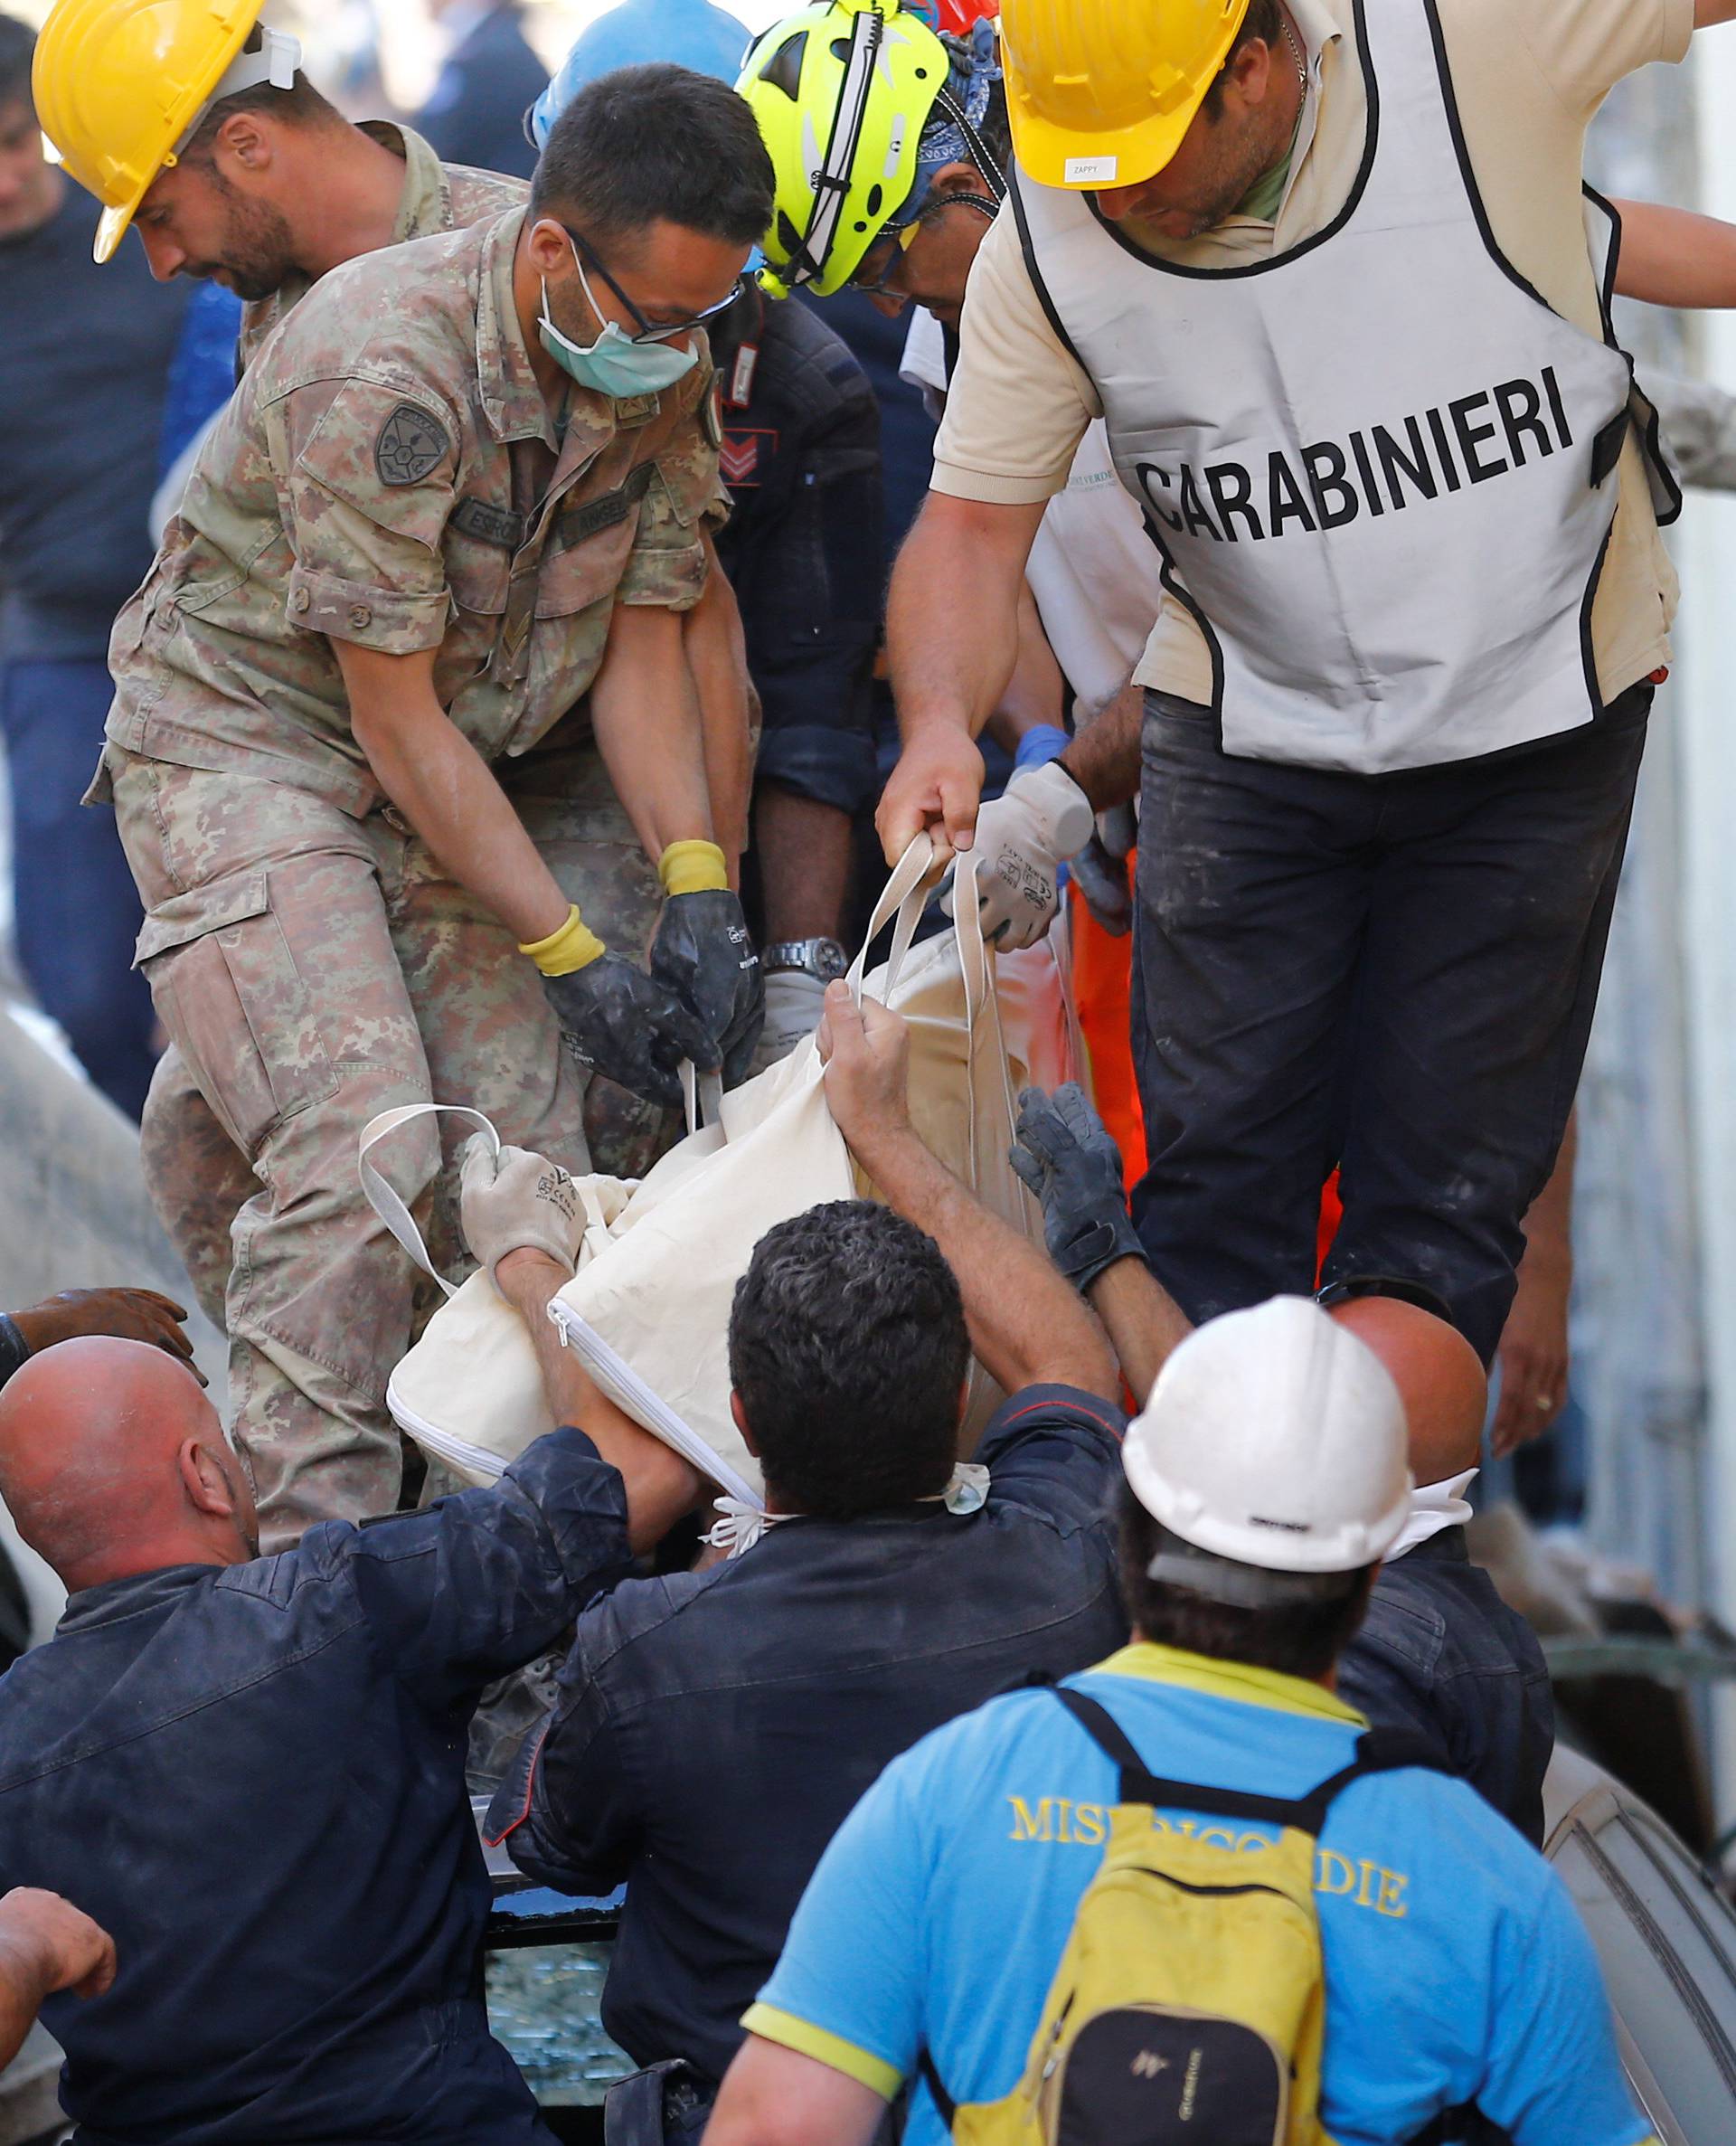 A body is carried away following an earthquake in Amatrice